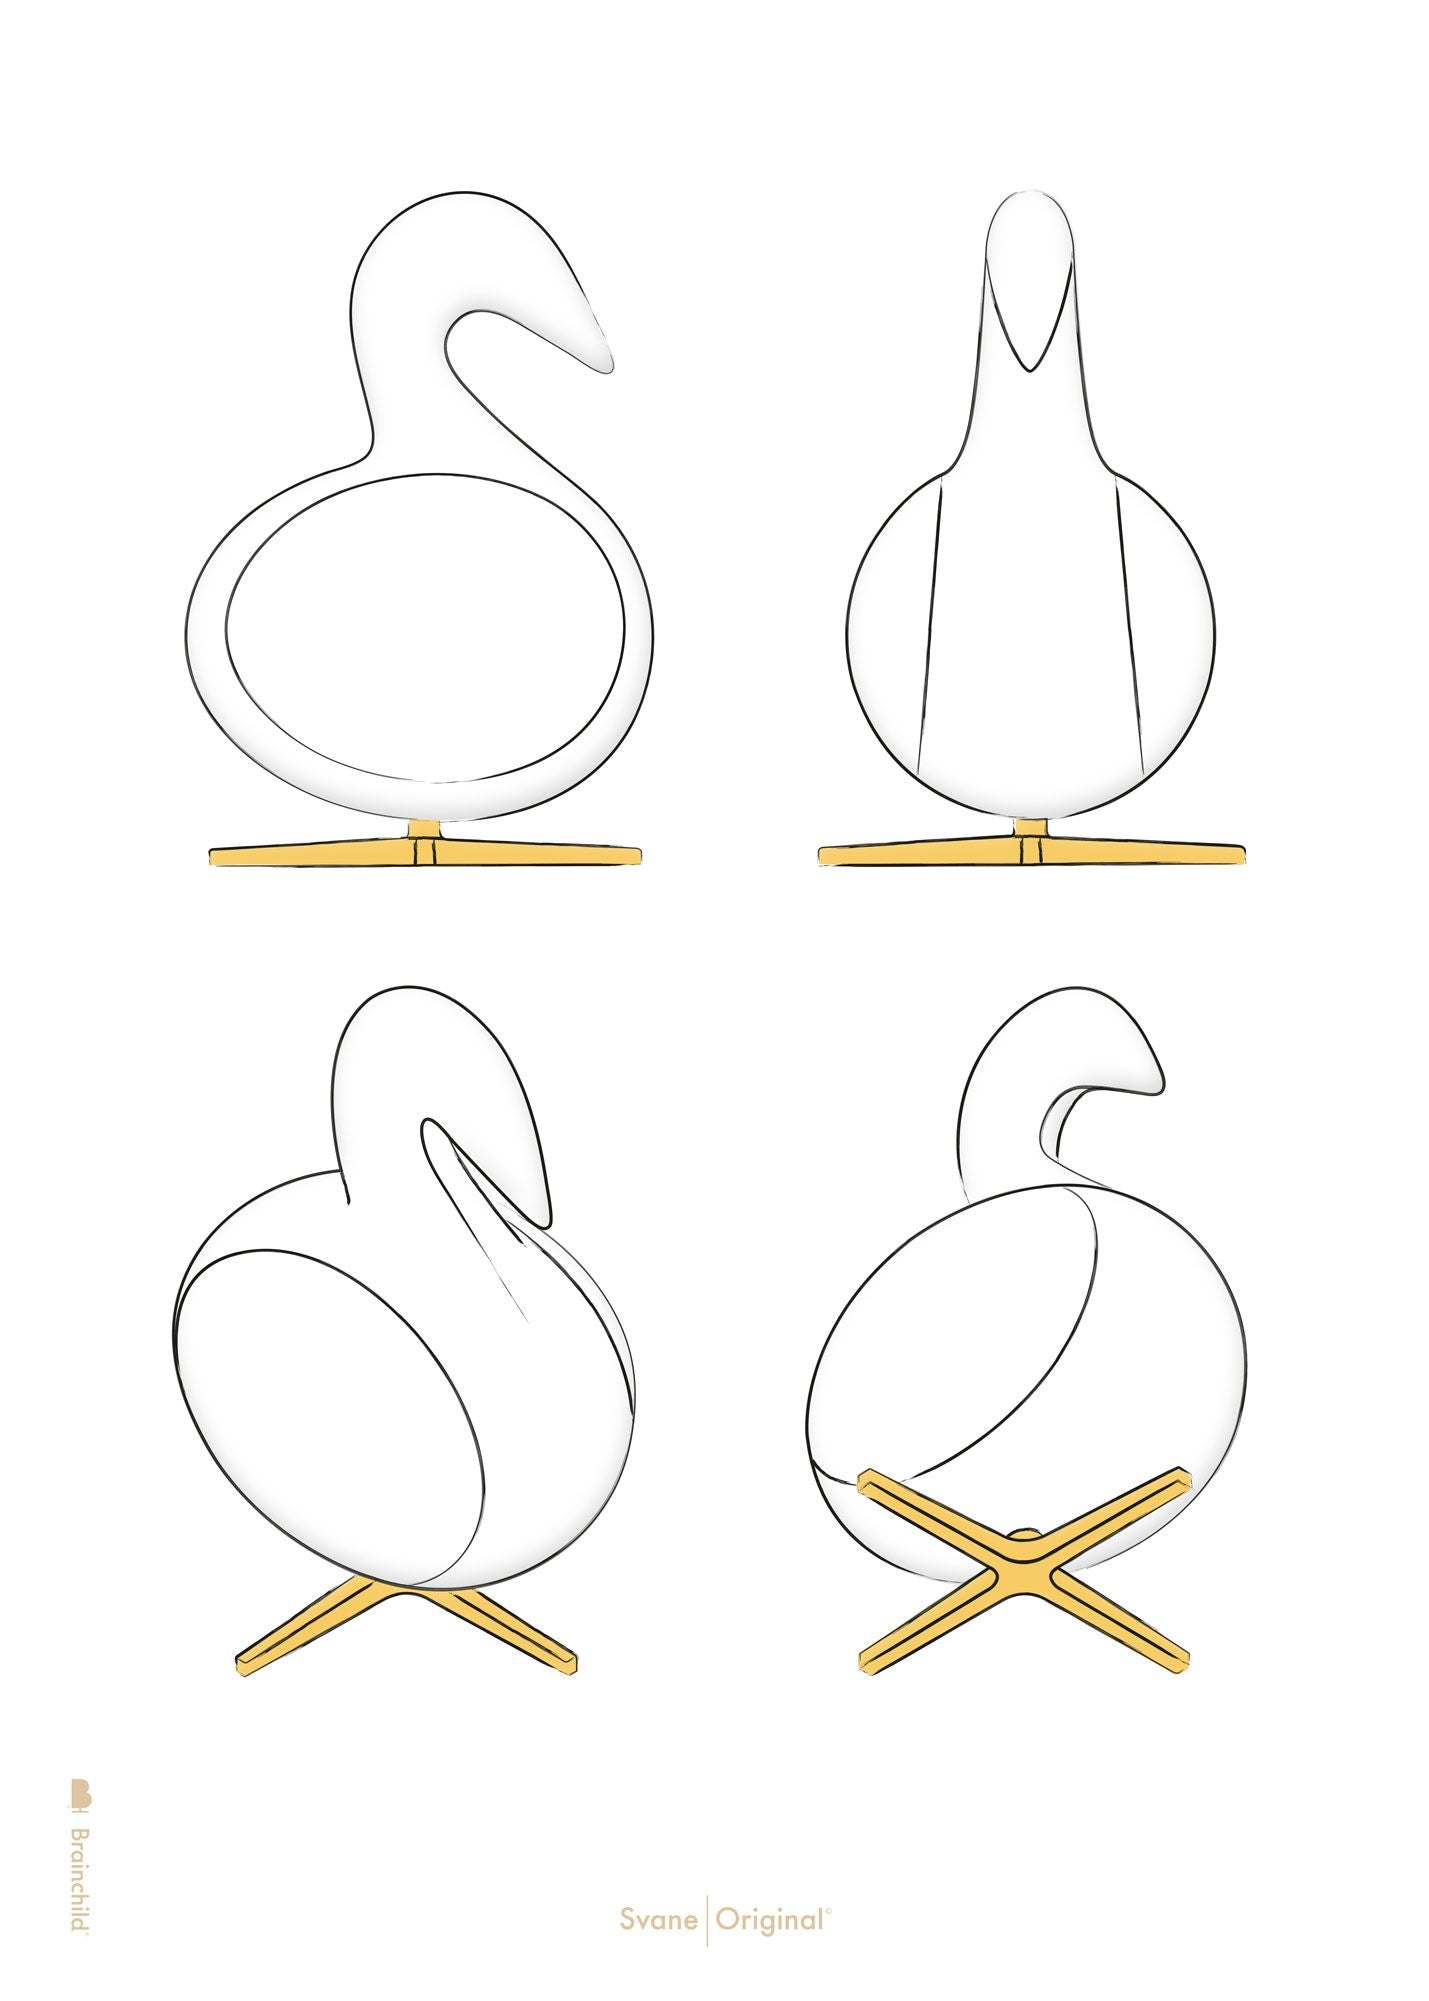 Brainchild Swan Design Sketches Poster Without Frame 30x40 Cm, White Background